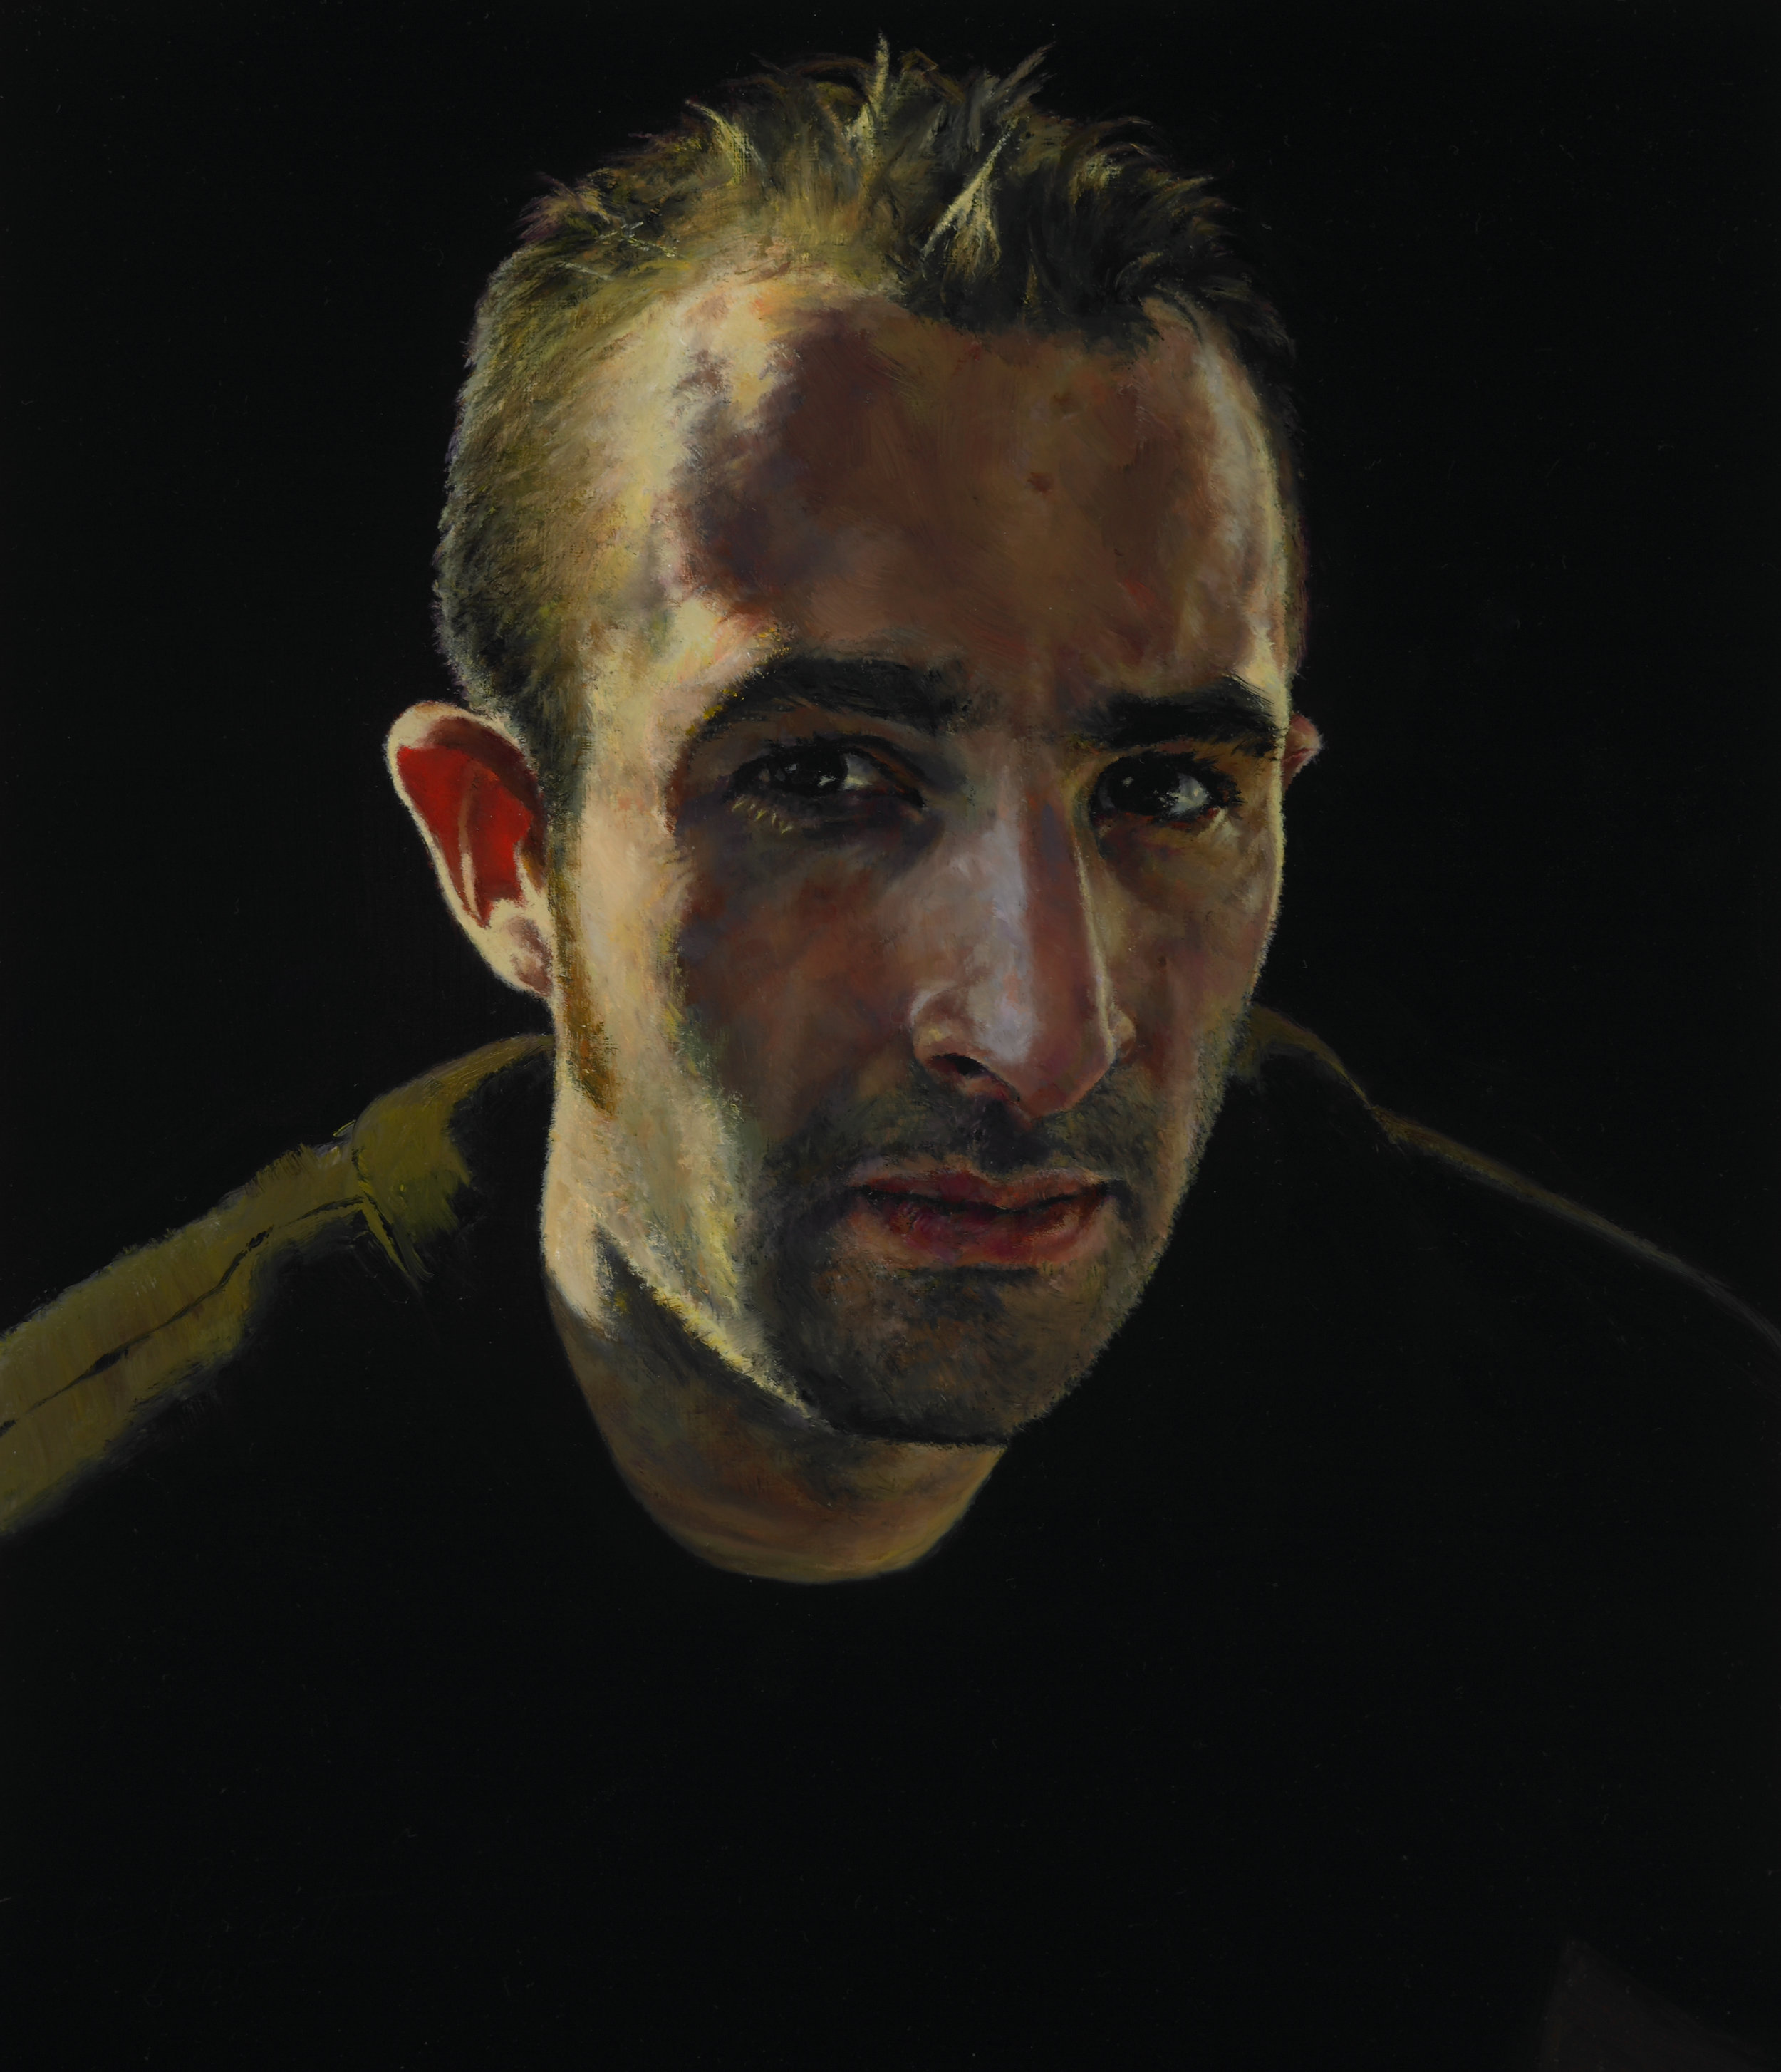   Peter , Oil on Wood Panel, 2006, 14" x 12", Private Collection 